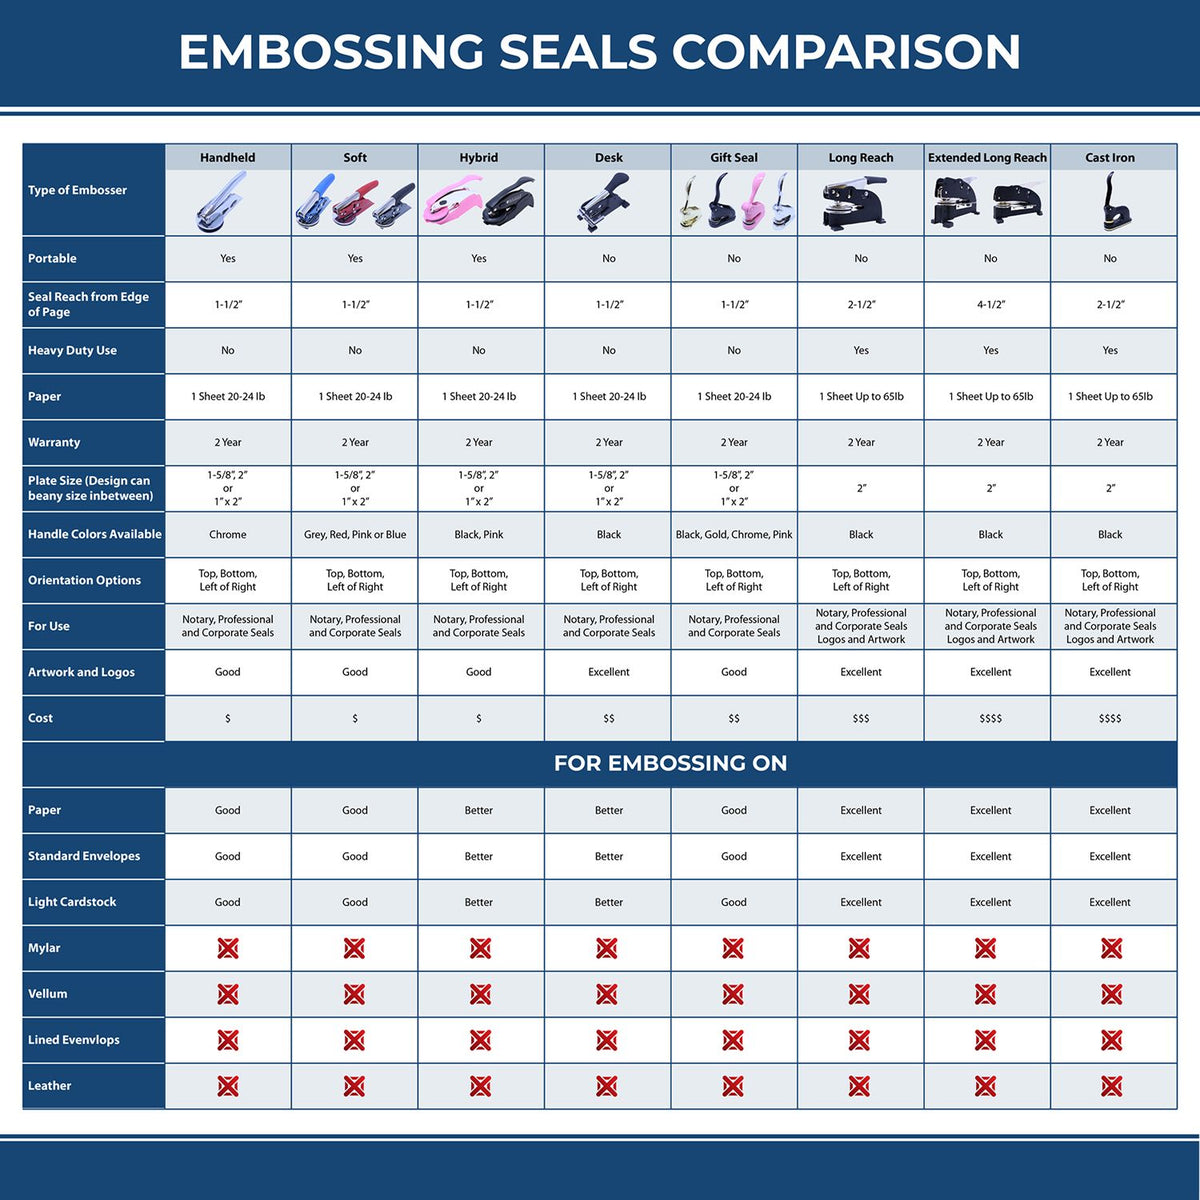 A comparison chart for the different types of mount models available for the Hybrid Virginia Engineer Seal